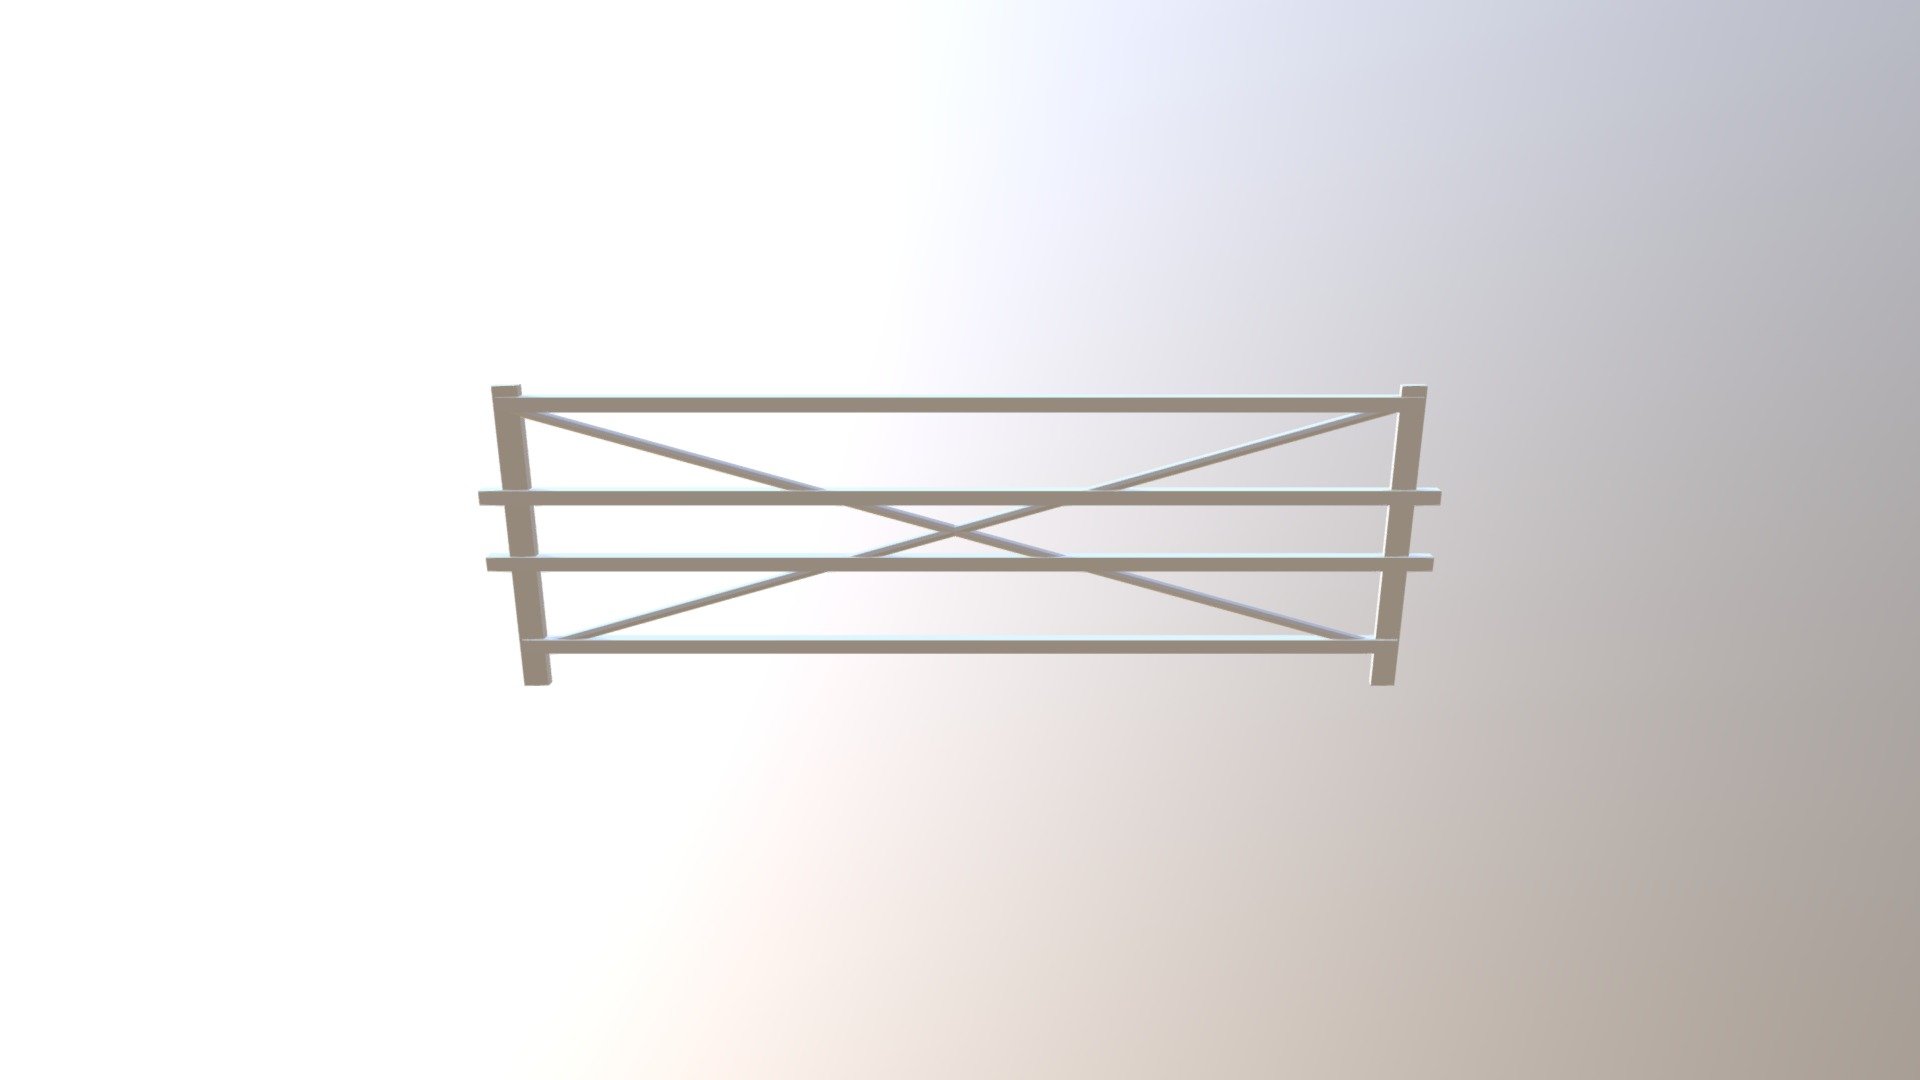 A Cartoon farm fence item that can be repeated several times to create a long fence 3d model